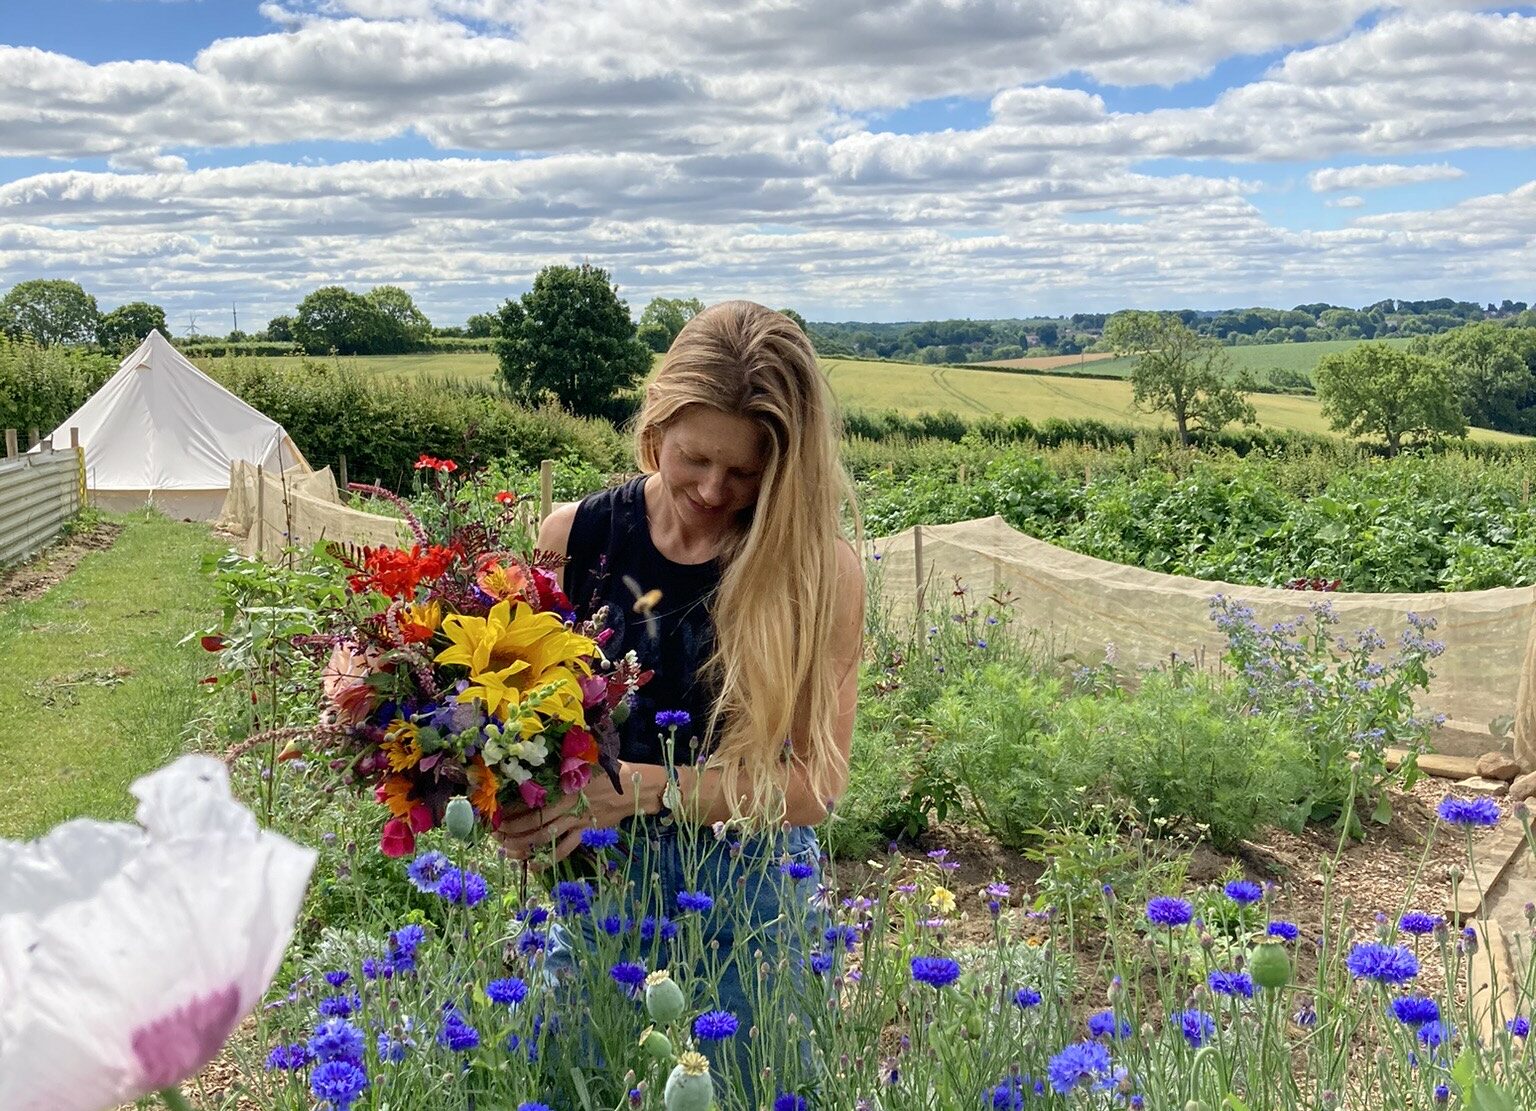 Sammie Hall at work gathering flowers on her plot, against an idyllic rural backdrop